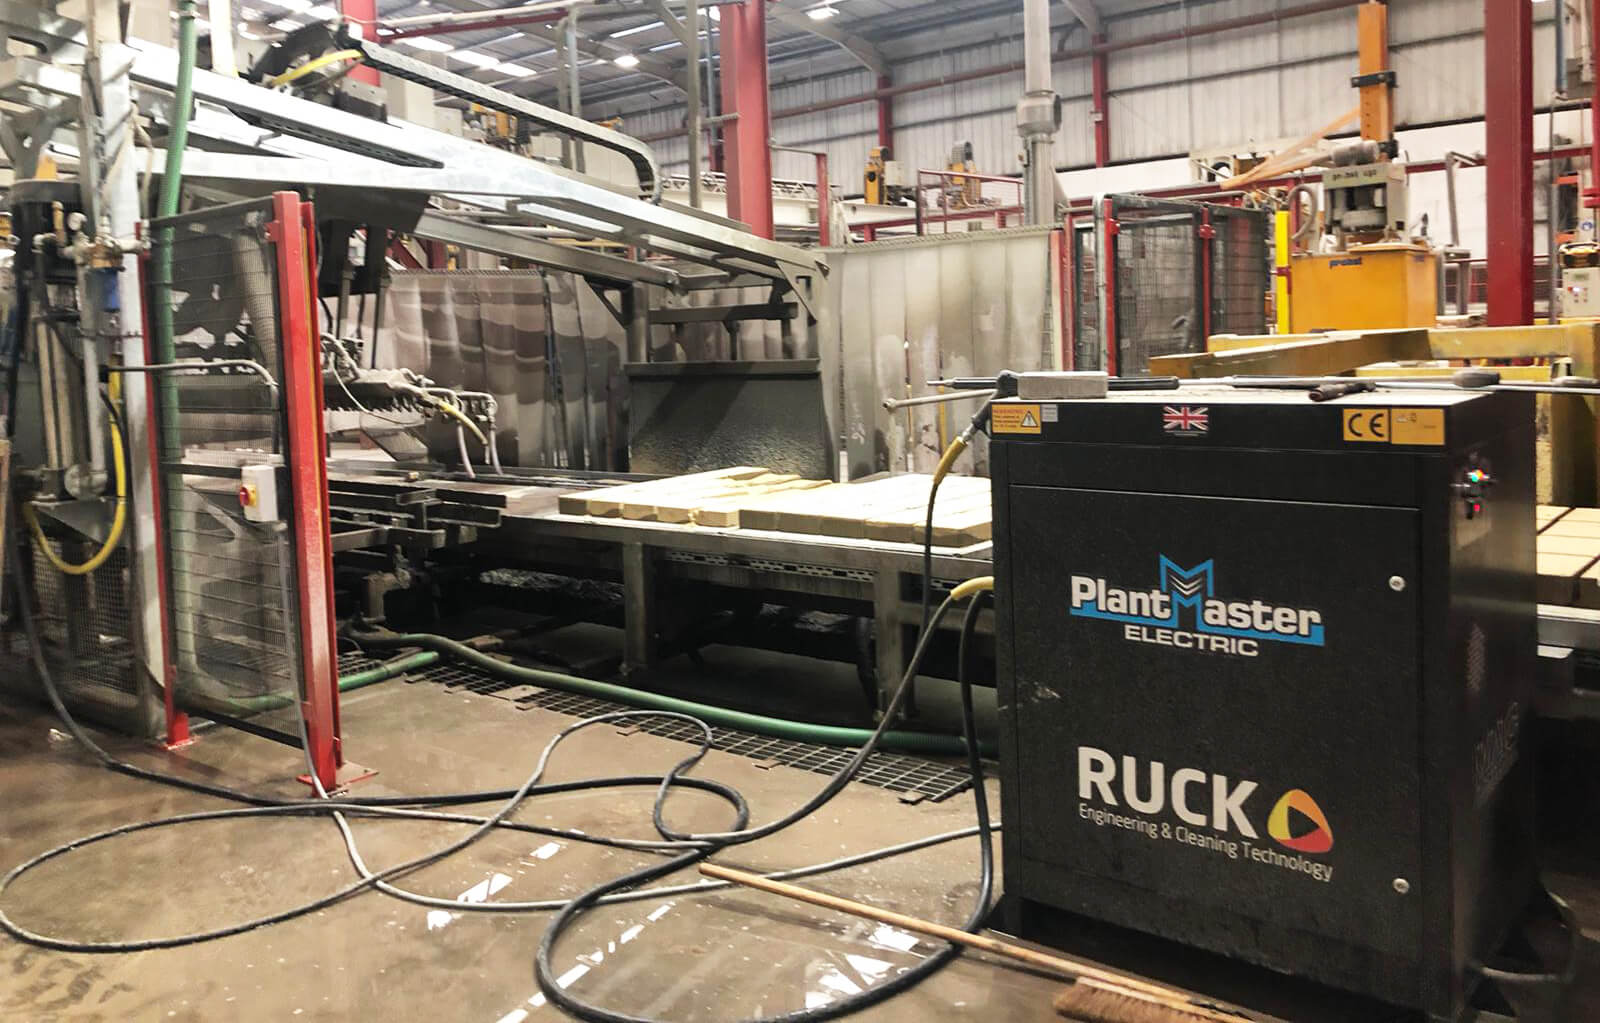 Ruck Engineering - Suppliers of hot and cold and electrically heated pressure washers, industrial floor sweepers and pedestrian and ride-on industrial floor scrubber driers.